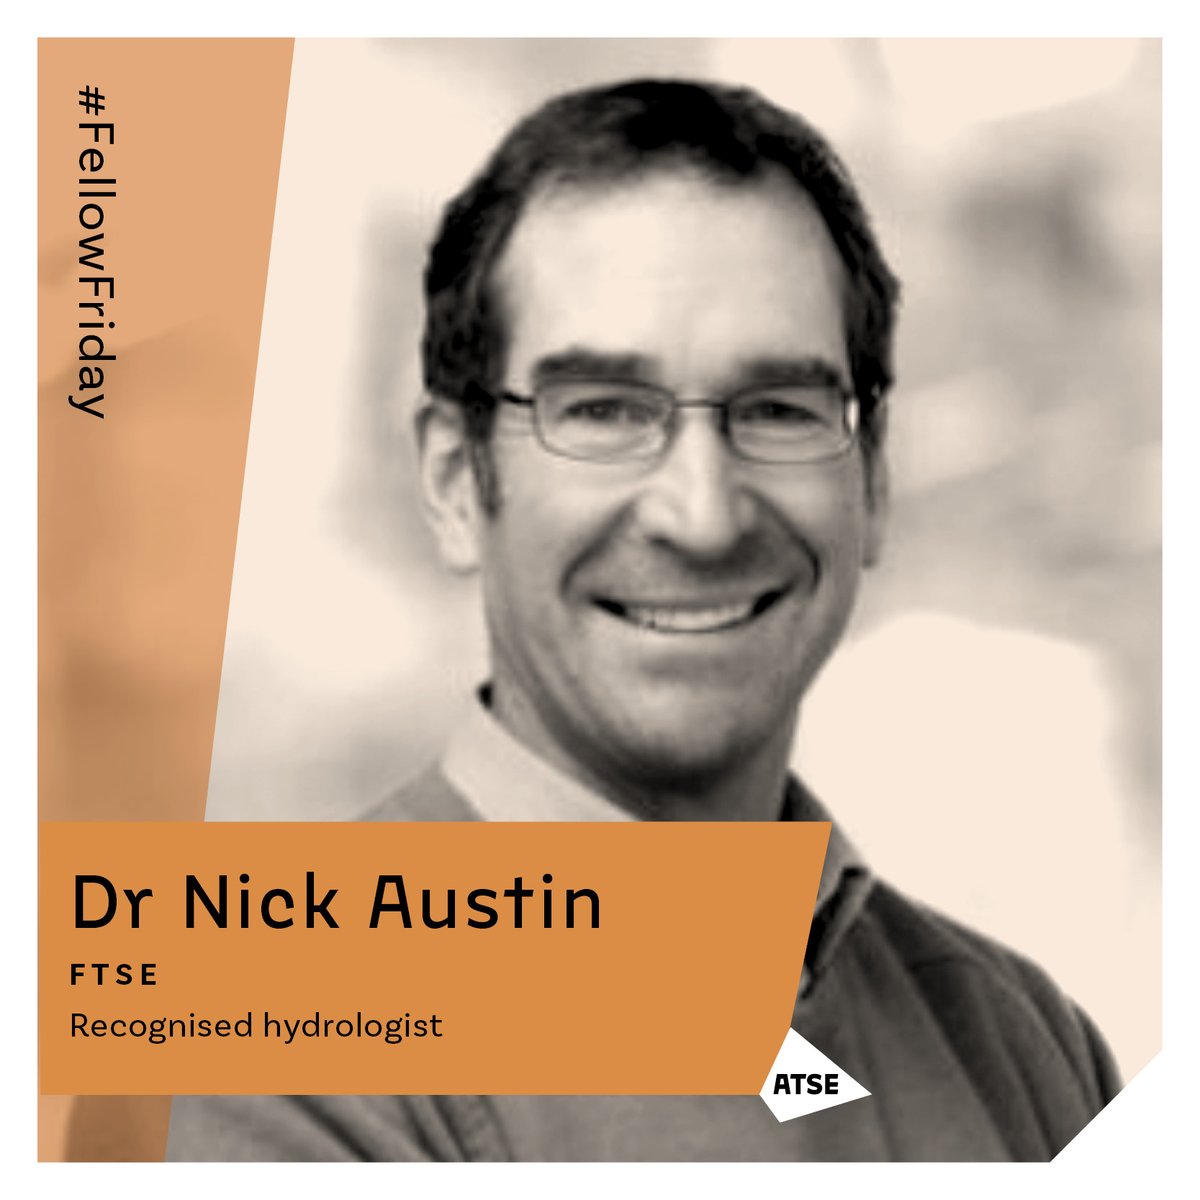 Meet this week’s #FellowFriday, Dr Nick Austin FTSE. Nick is a hydrologist by training, bridging agriculture and engineering in the critical area of water. 💧 👏 He is the new President of the Policy Advisory Council for the @ACIARAustralia. 🔗 More: atse.org.au/our-fellows/20…